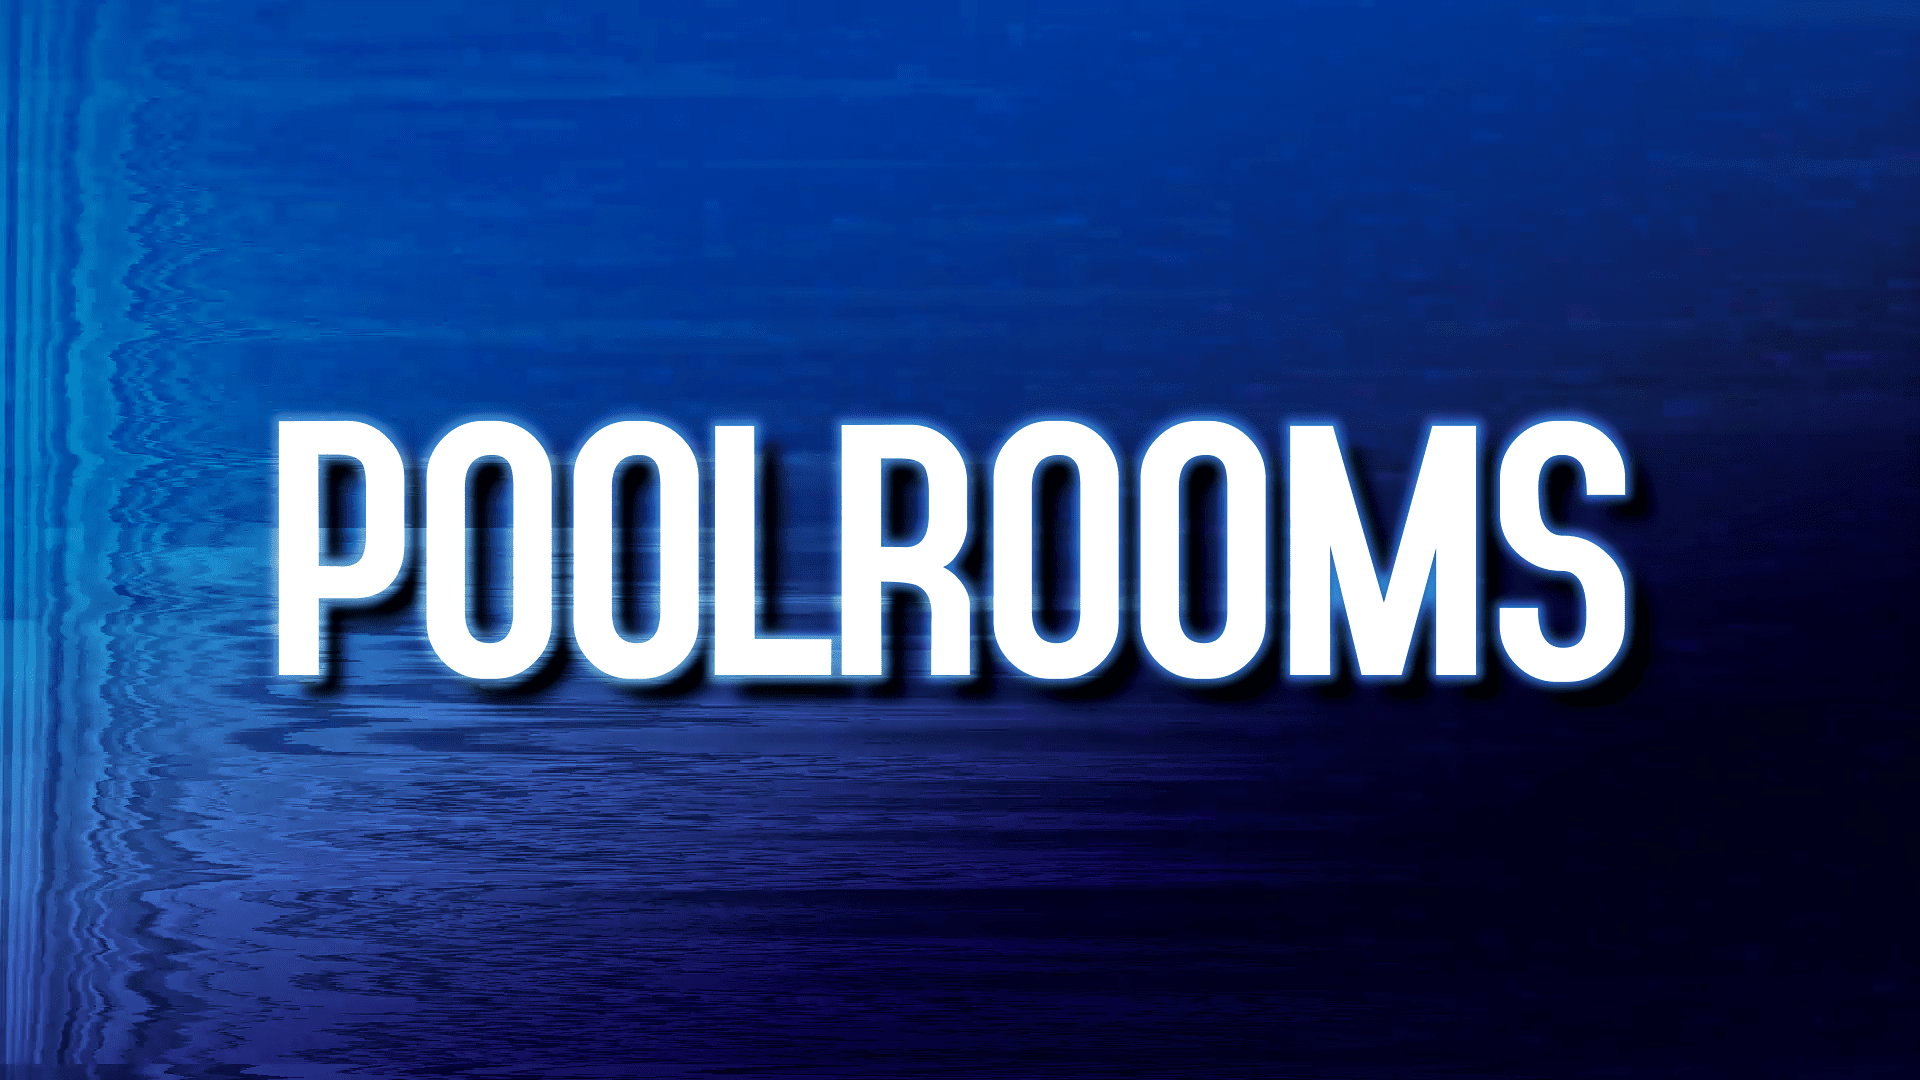 Poolrooms Theme - The Backrooms